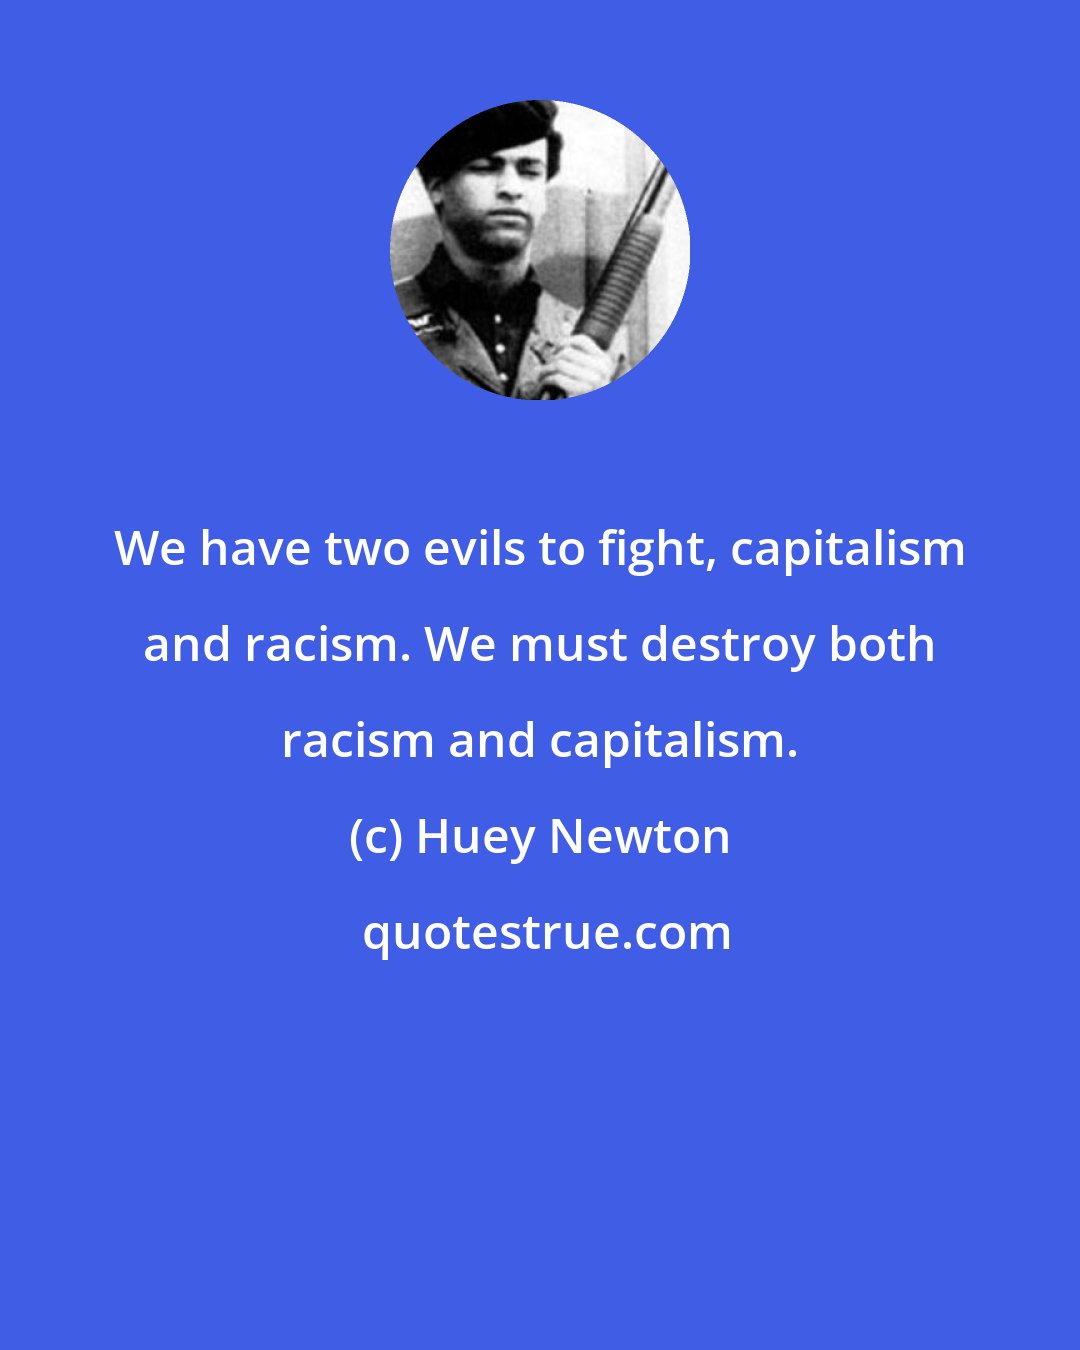 Huey Newton: We have two evils to fight, capitalism and racism. We must destroy both racism and capitalism.